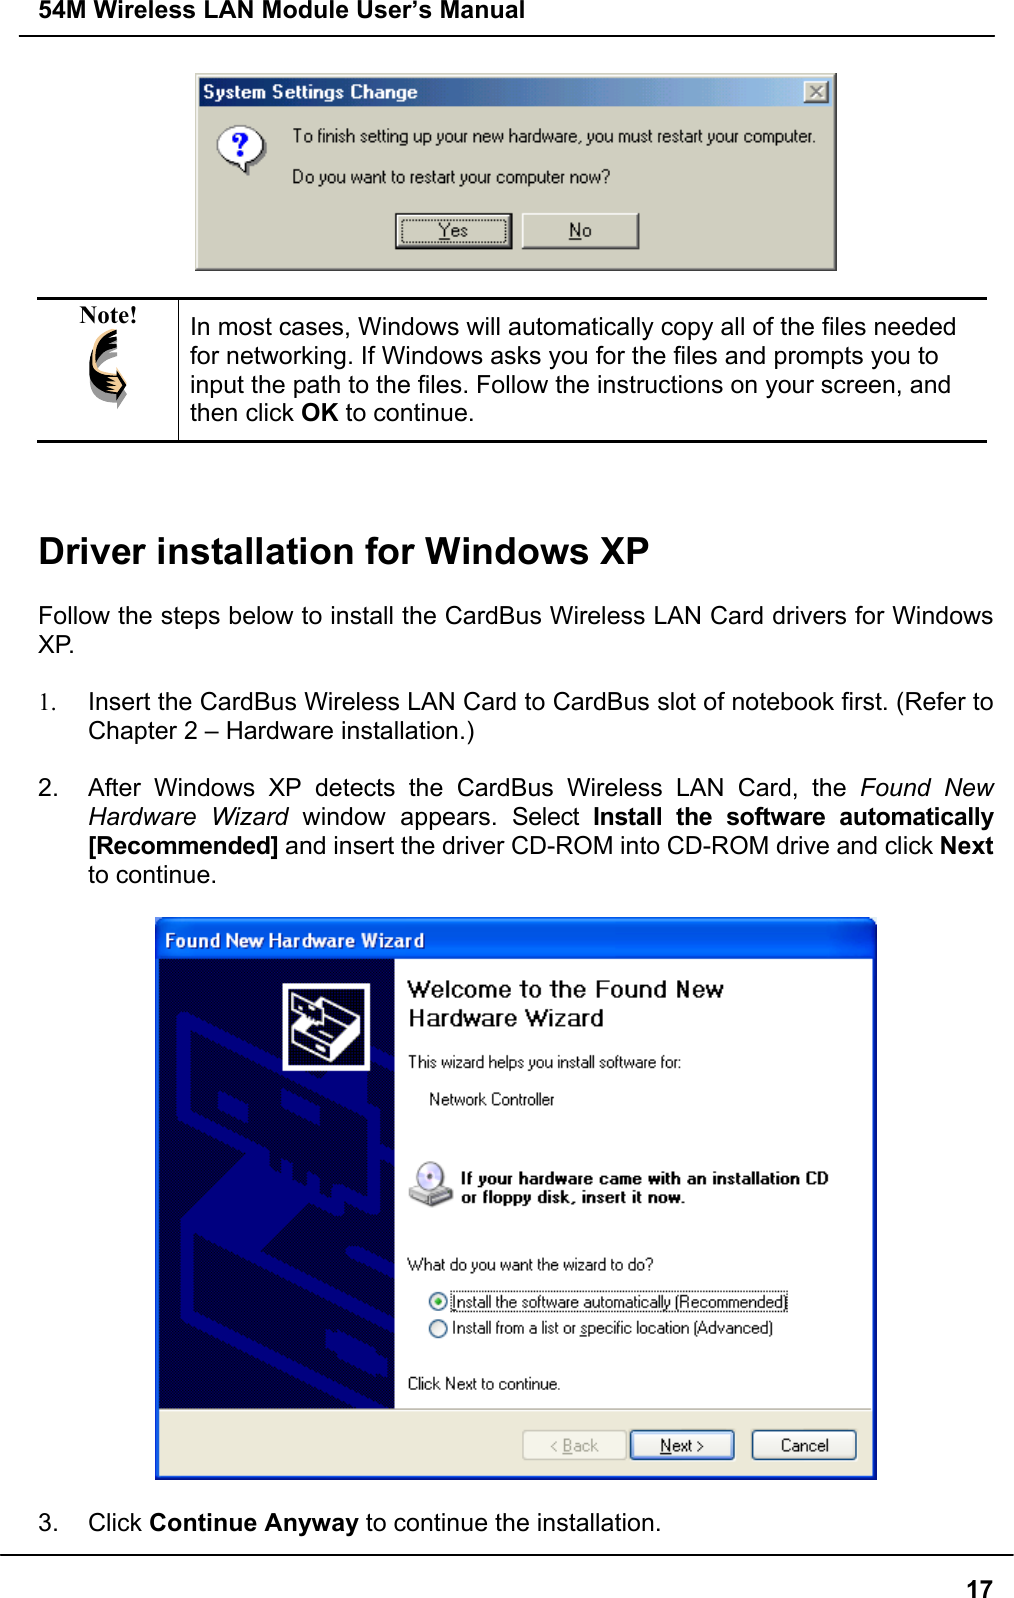 54M Wireless LAN Module User’s Manual17Note! In most cases, Windows will automatically copy all of the files neededfor networking. If Windows asks you for the files and prompts you toinput the path to the files. Follow the instructions on your screen, andthen click OK to continue.Driver installation for Windows XPFollow the steps below to install the CardBus Wireless LAN Card drivers for WindowsXP.1.  Insert the CardBus Wireless LAN Card to CardBus slot of notebook first. (Refer toChapter 2 – Hardware installation.)2.  After Windows XP detects the CardBus Wireless LAN Card, the Found NewHardware Wizard window appears. Select Install the software automatically[Recommended] and insert the driver CD-ROM into CD-ROM drive and click Nextto continue.3. Click Continue Anyway to continue the installation.